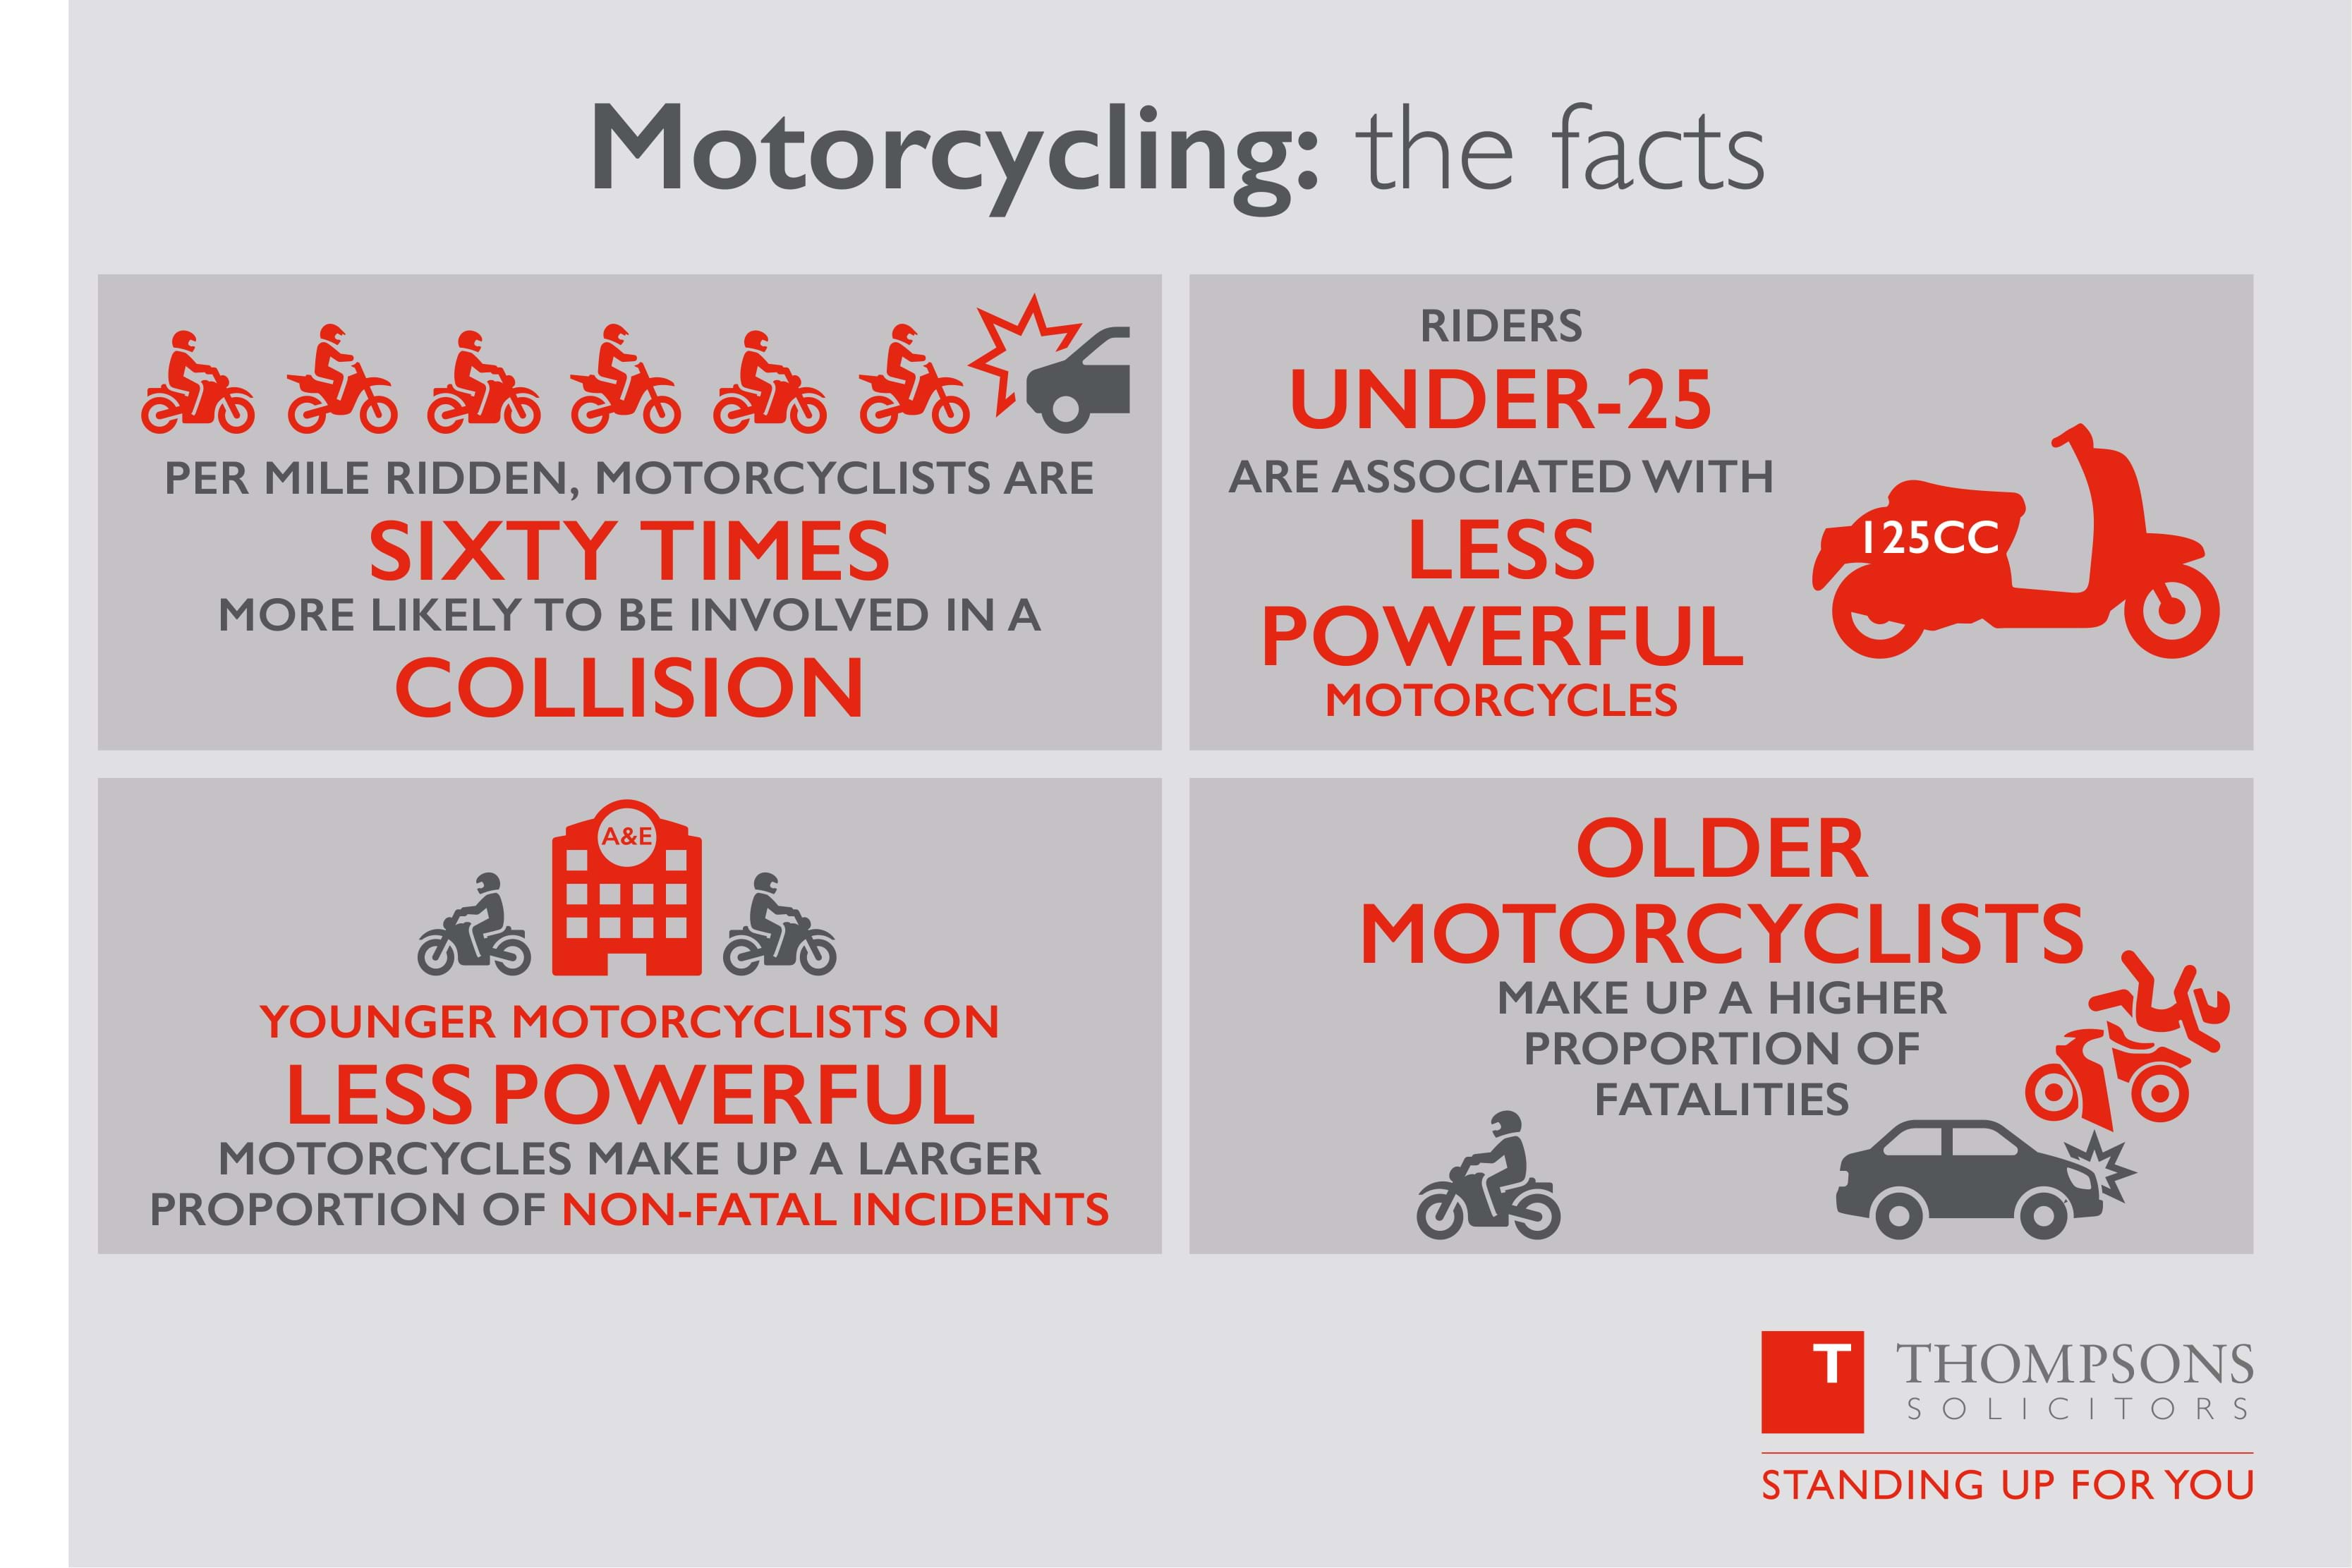 An infographic from Thompsons Solicitors outlining statistics relating to motorcycle statistics 